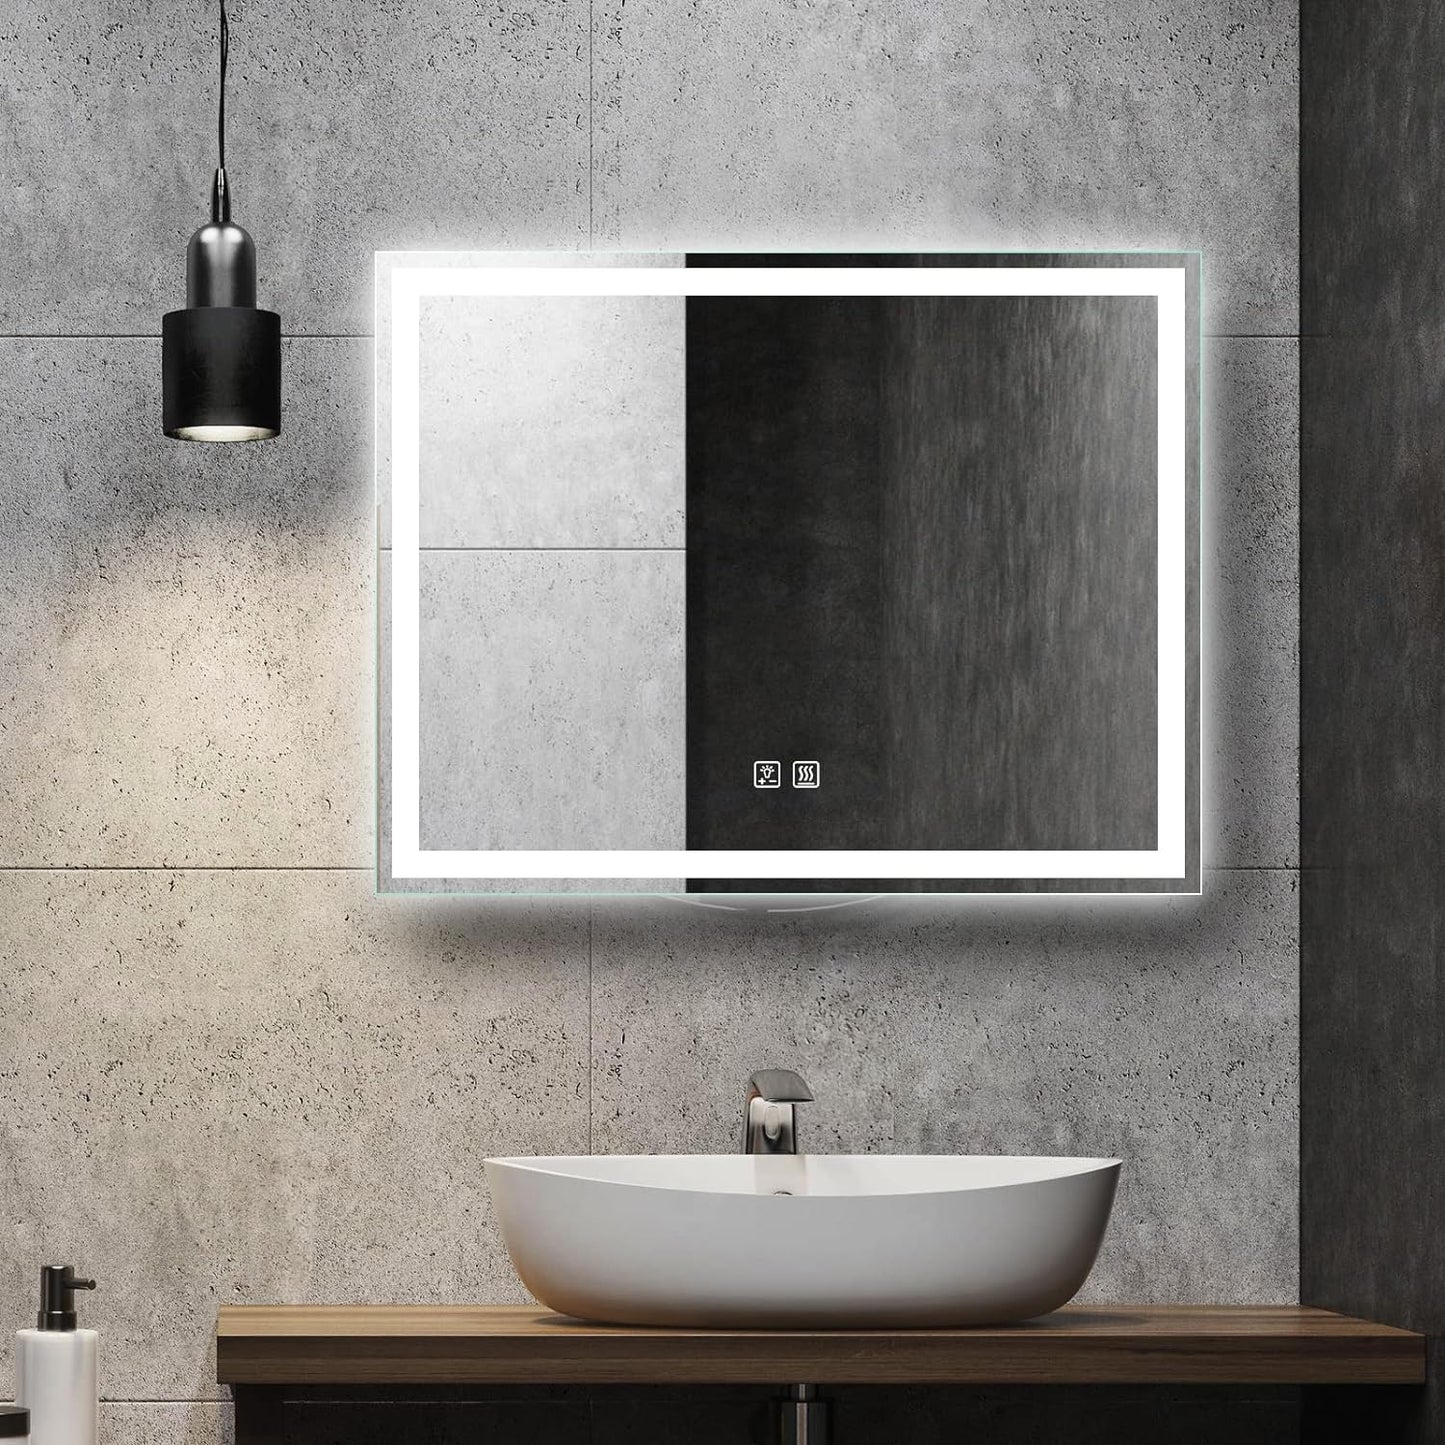 Frameless Frosted Square Led Bathroom Mirrors with Dimmable Lights Small